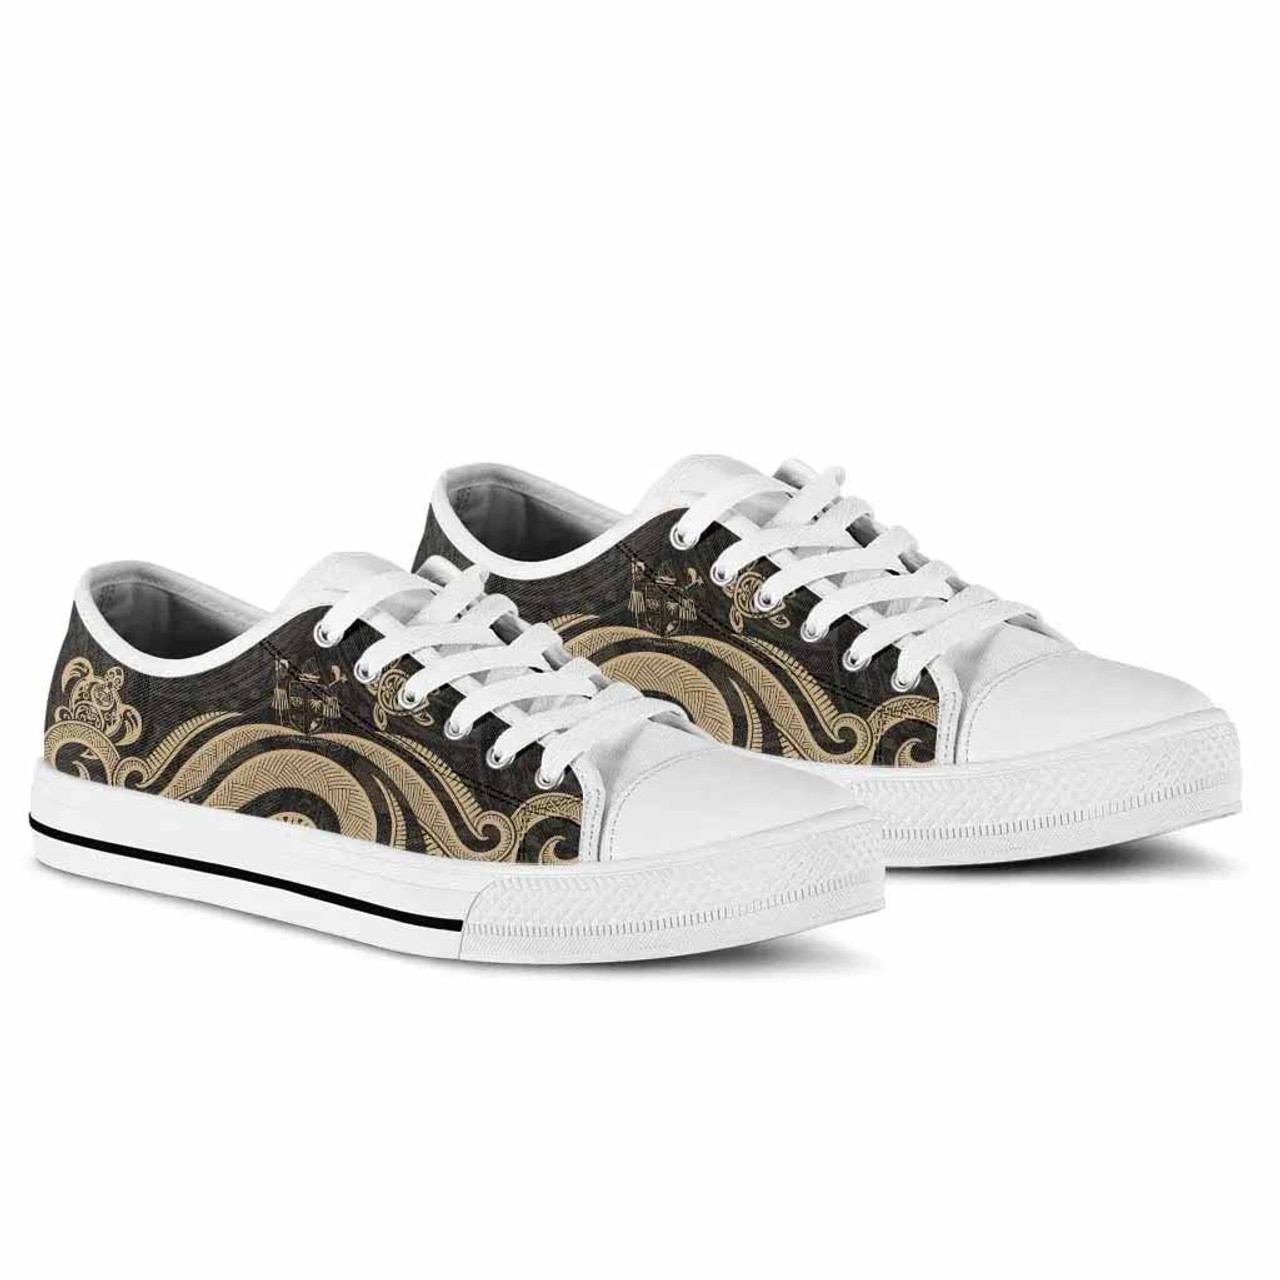 Fiji Low Top Canvas Shoes - Gold Tentacle Turtle Crest 7